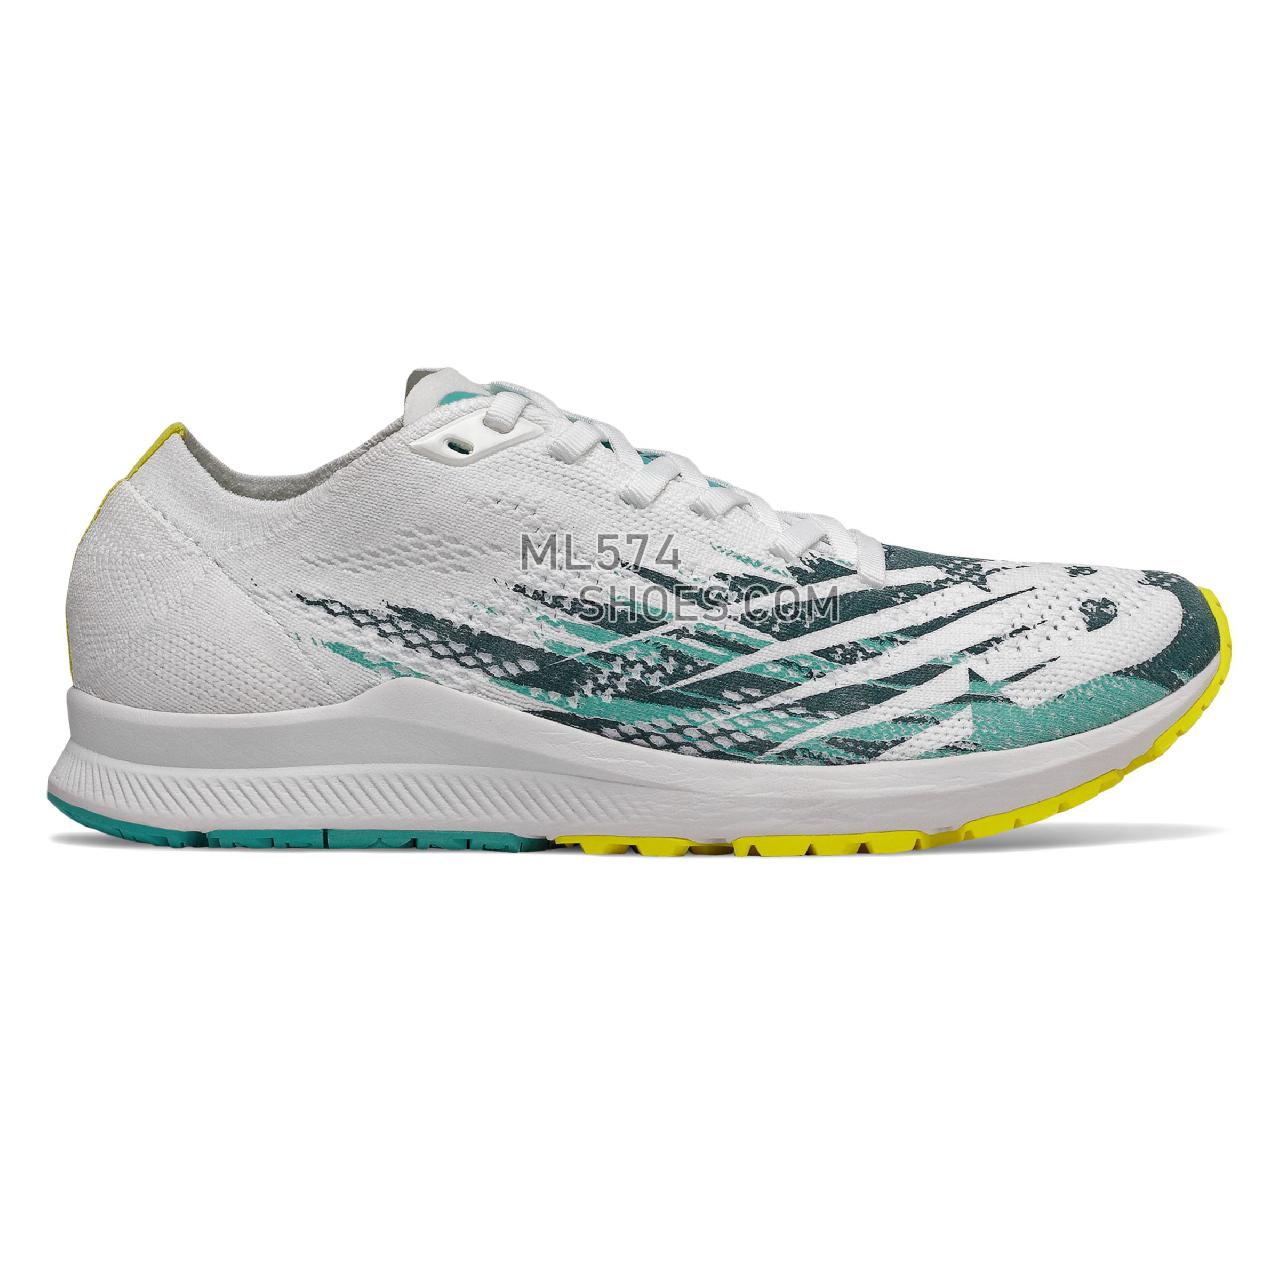 New Balance 1500v6 - Women's Track Spikes And Cross Country - White with Sulphur and Tidepool - W1500WY6